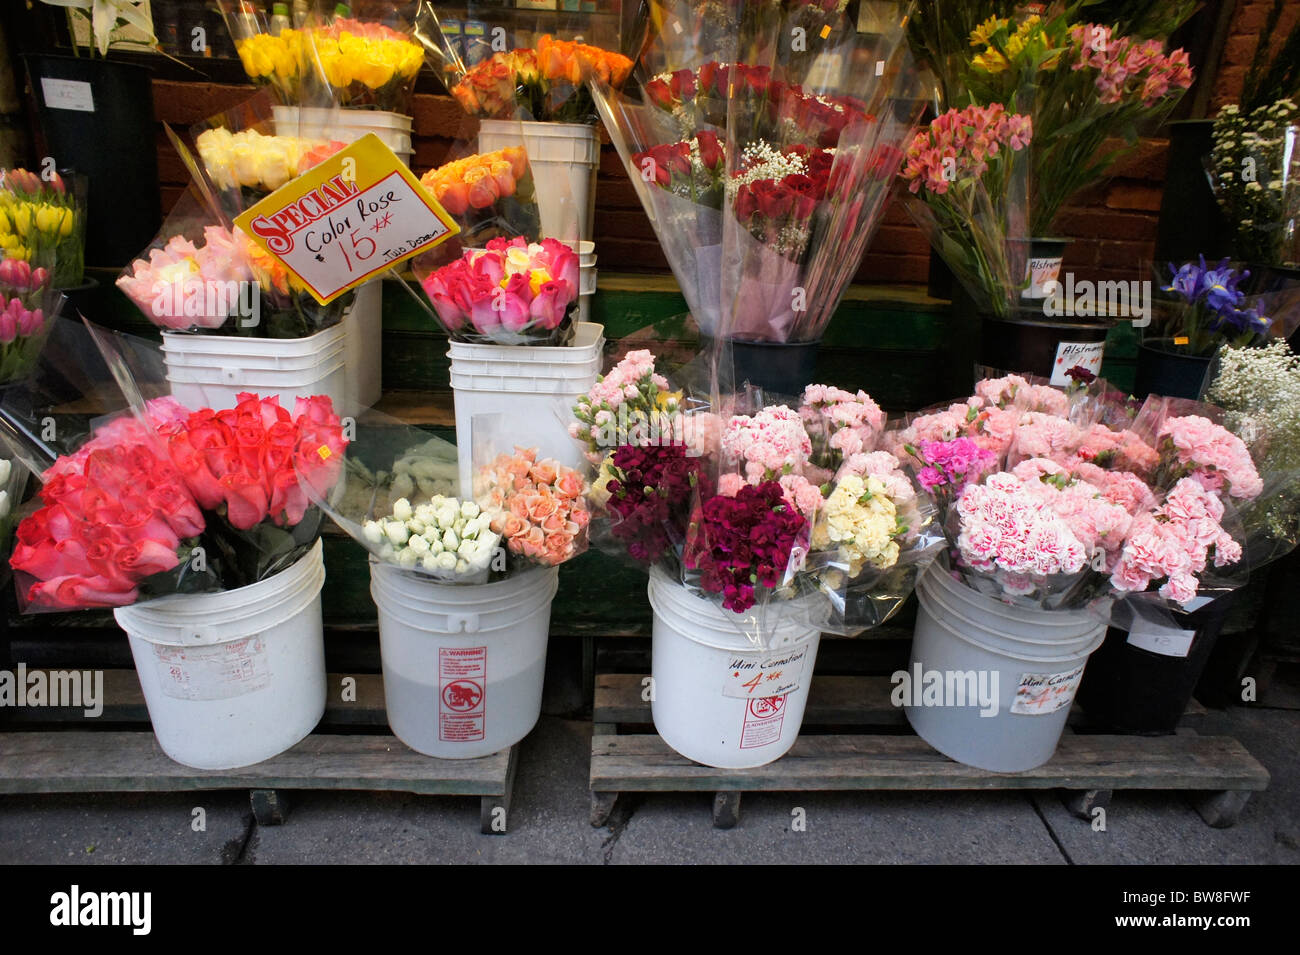 Buckets Of Flowers High Resolution Stock Photography and Images - Alamy